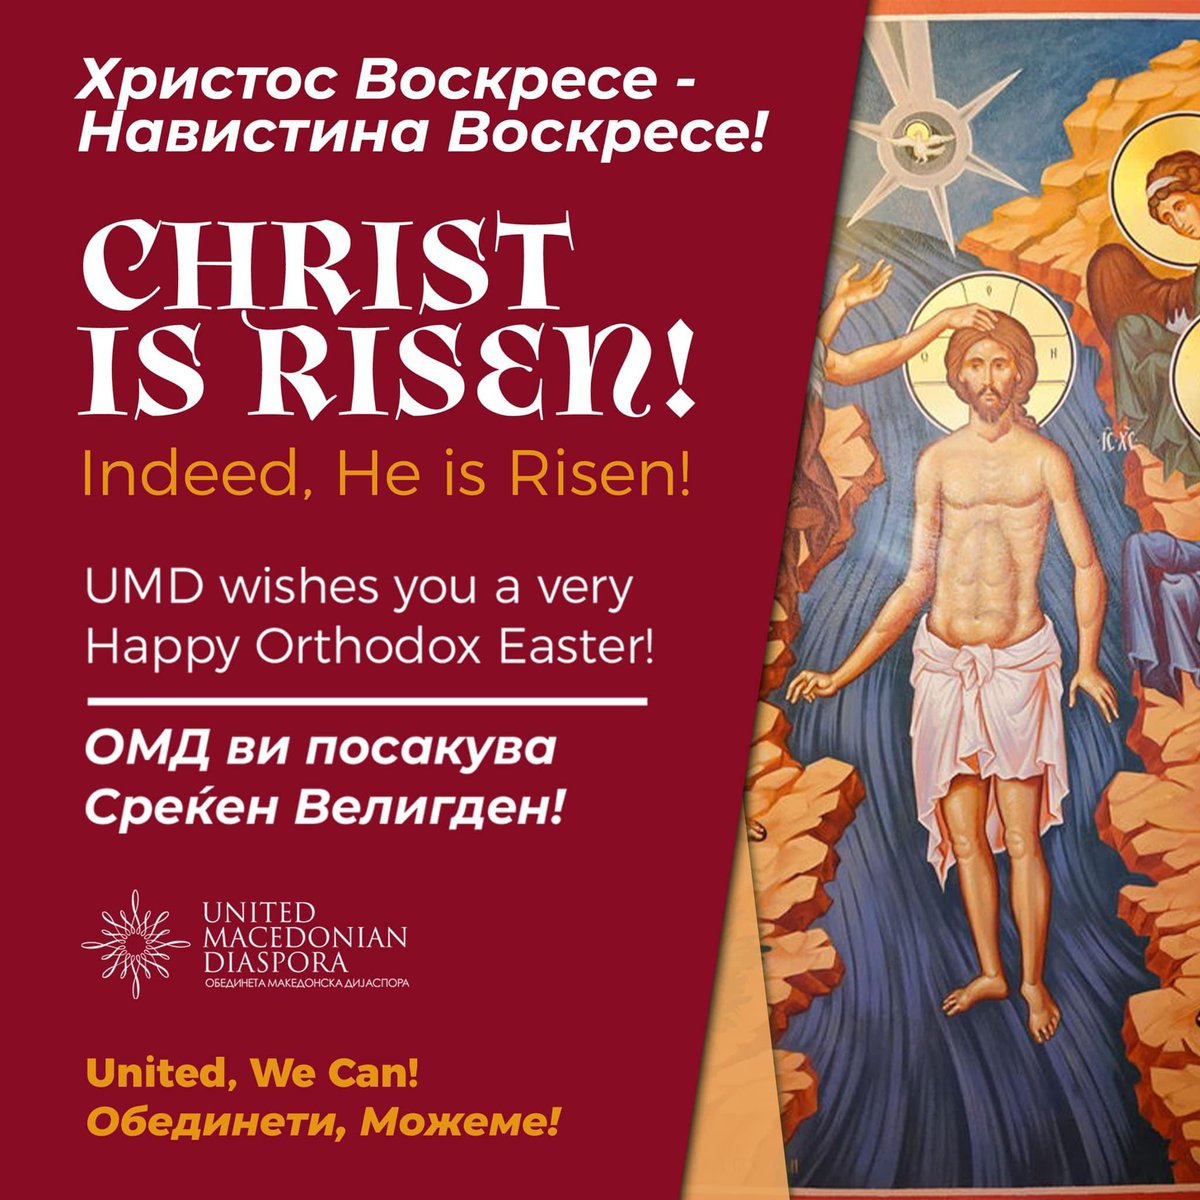 Христос Воскресе!
Christ is Risen!

Среќен Велигден!
Happy Orthodox Easter!

Icon is from the Sts Kiril & Metodij Macedonian Orthodox Church, #New Jersey, #USA.

#OrthodoxEaster
#Easter
#Macedonians
#MacedonianOrthodoxChurch
#Balkans
#Orthodoxy
#EasterSunday